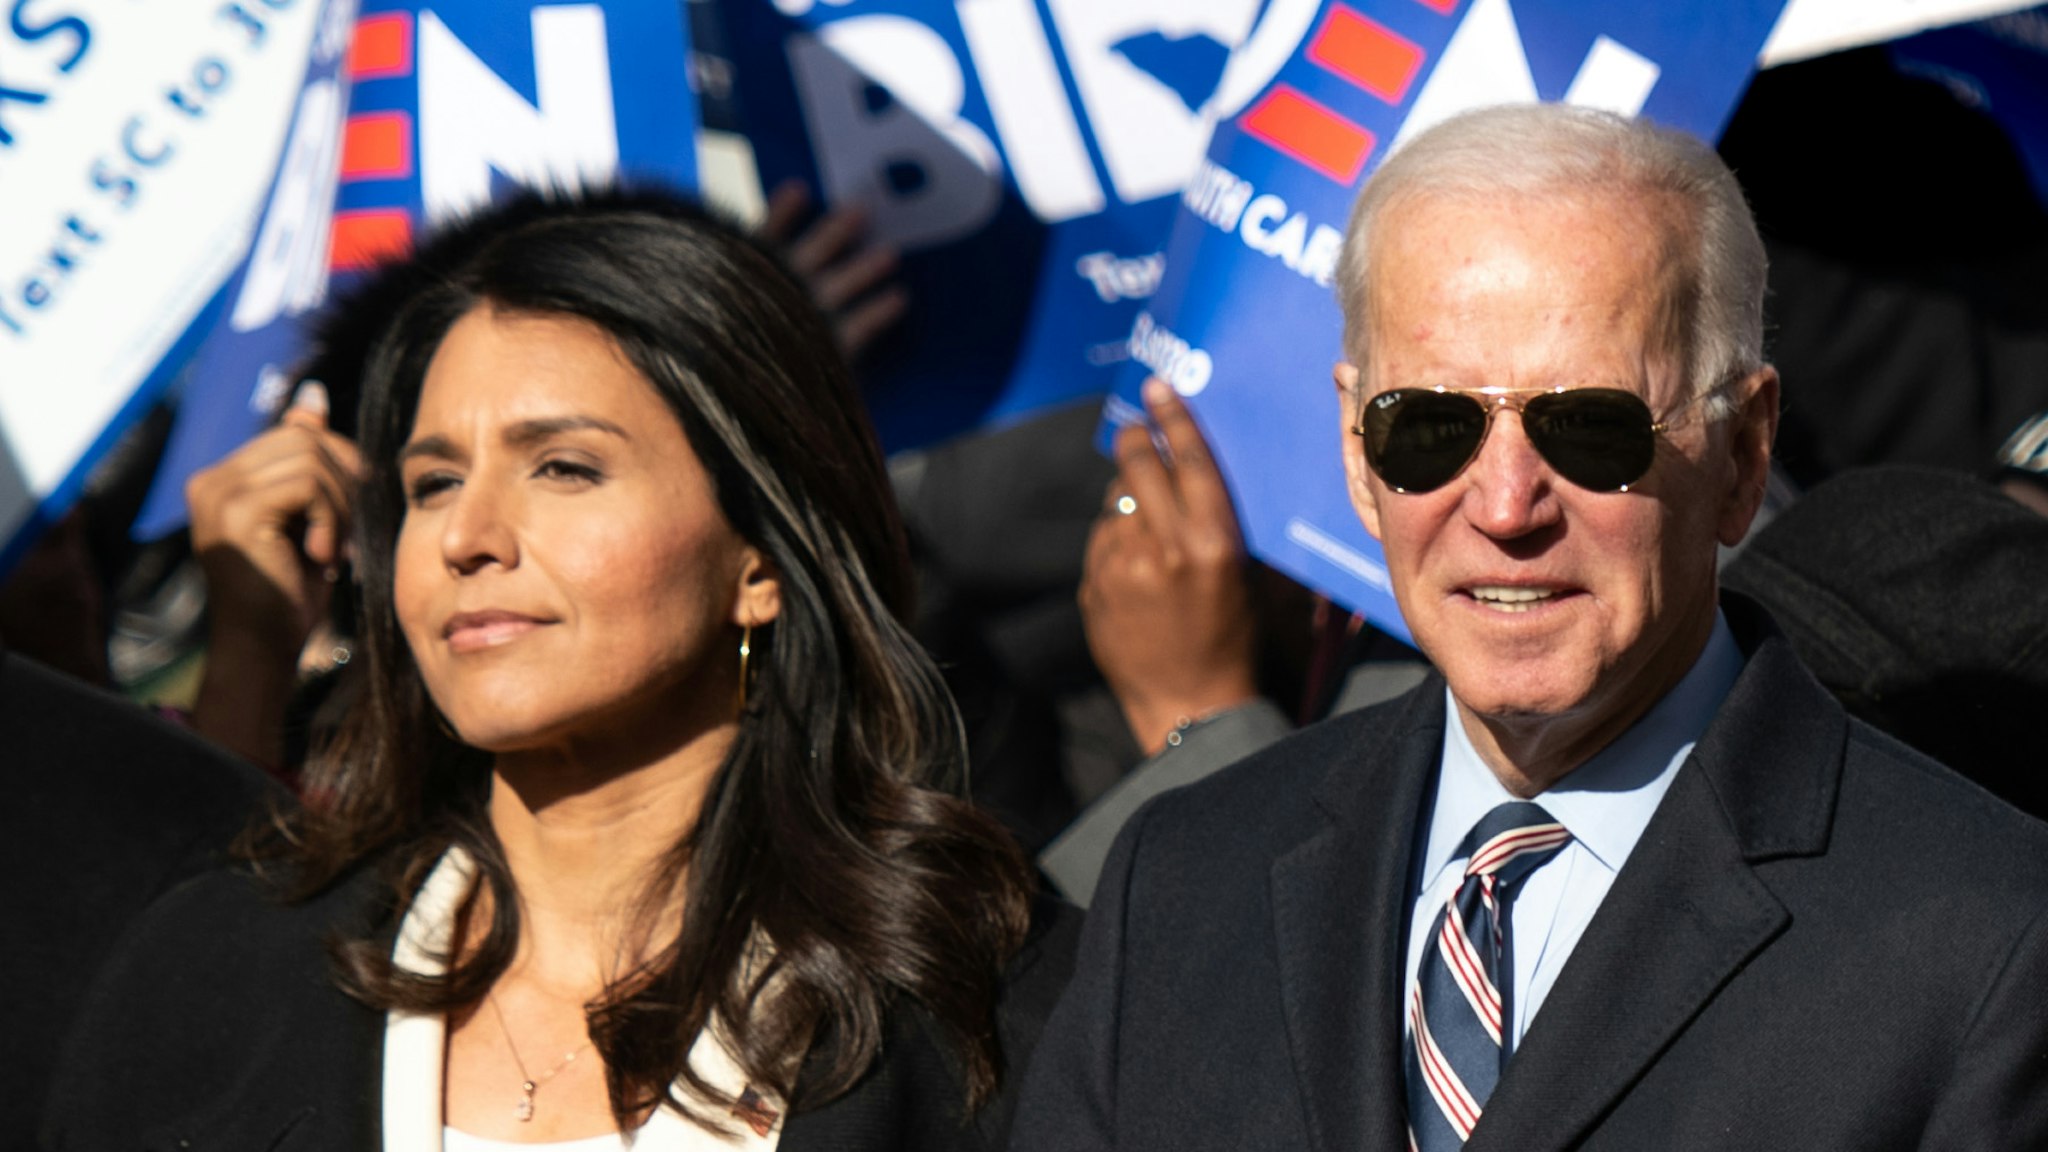 COLUMBIA, SC - JANUARY 20: Democratic presidential candidates, Rep. Tulsi Gabbard (D-HI), left, former Vice President Joe Biden, Sen. Amy Klobuchar (D-MN), Sen. Elizabeth Warren (D-MA), and Sen. Bernie Sanders (I-VT), right, march on Main St. to the King Day at the Dome event with Democratic candidate for U.S. Senate Jaime Harrison, far left, on January 20, 2020 in Columbia, South Carolina. The event, first held in 2000 in opposition to the display of the Confederate battle flag at the statehouse, attracted more than a handful of Democratic presidential candidates to the early primary state.